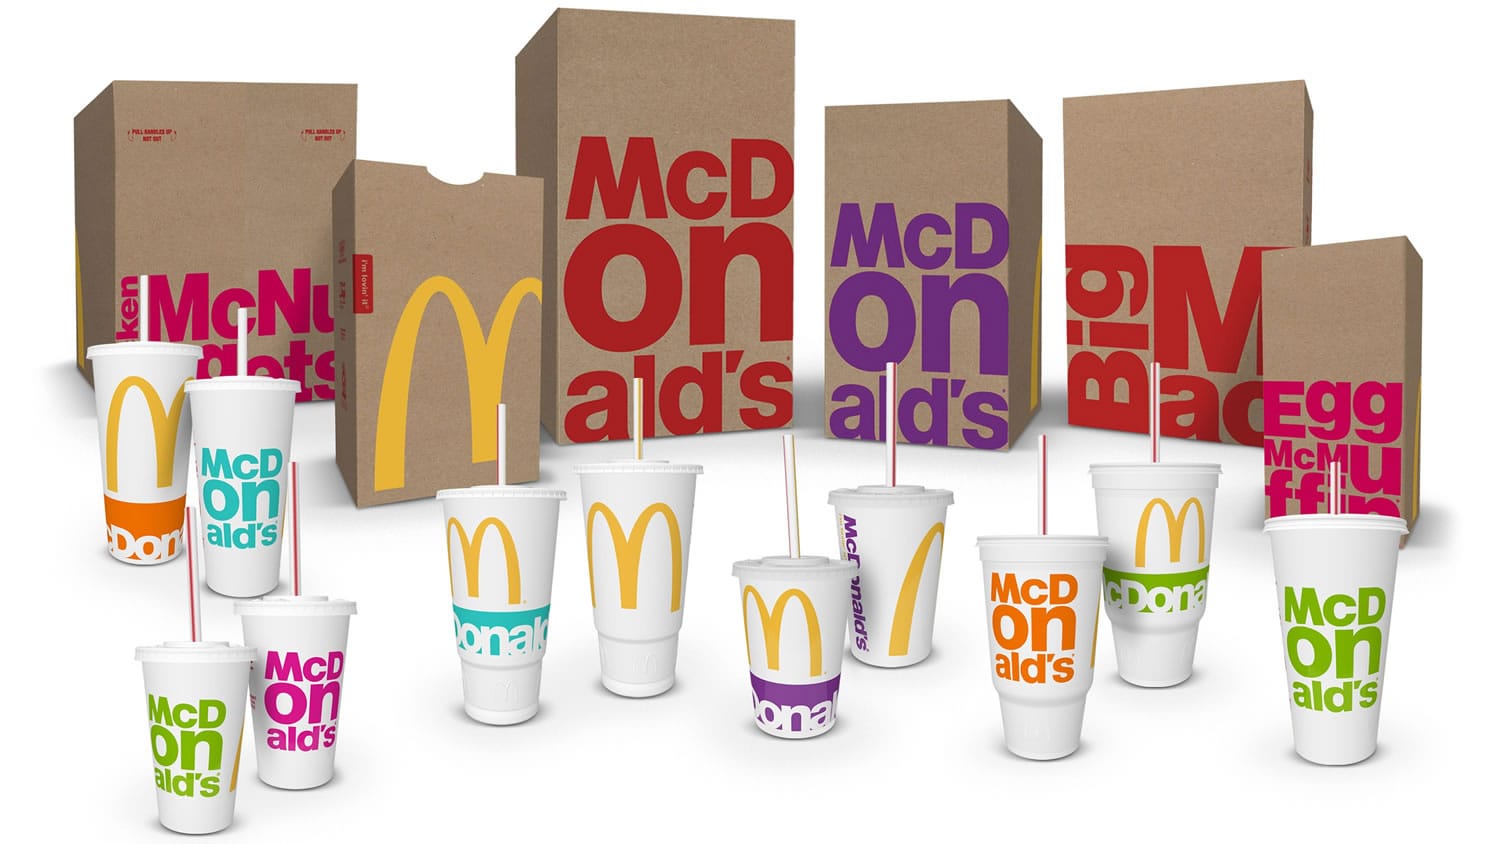 McDonald&#039;s is introducing new packaging in its continued effort to improve its business and target younger consumers.